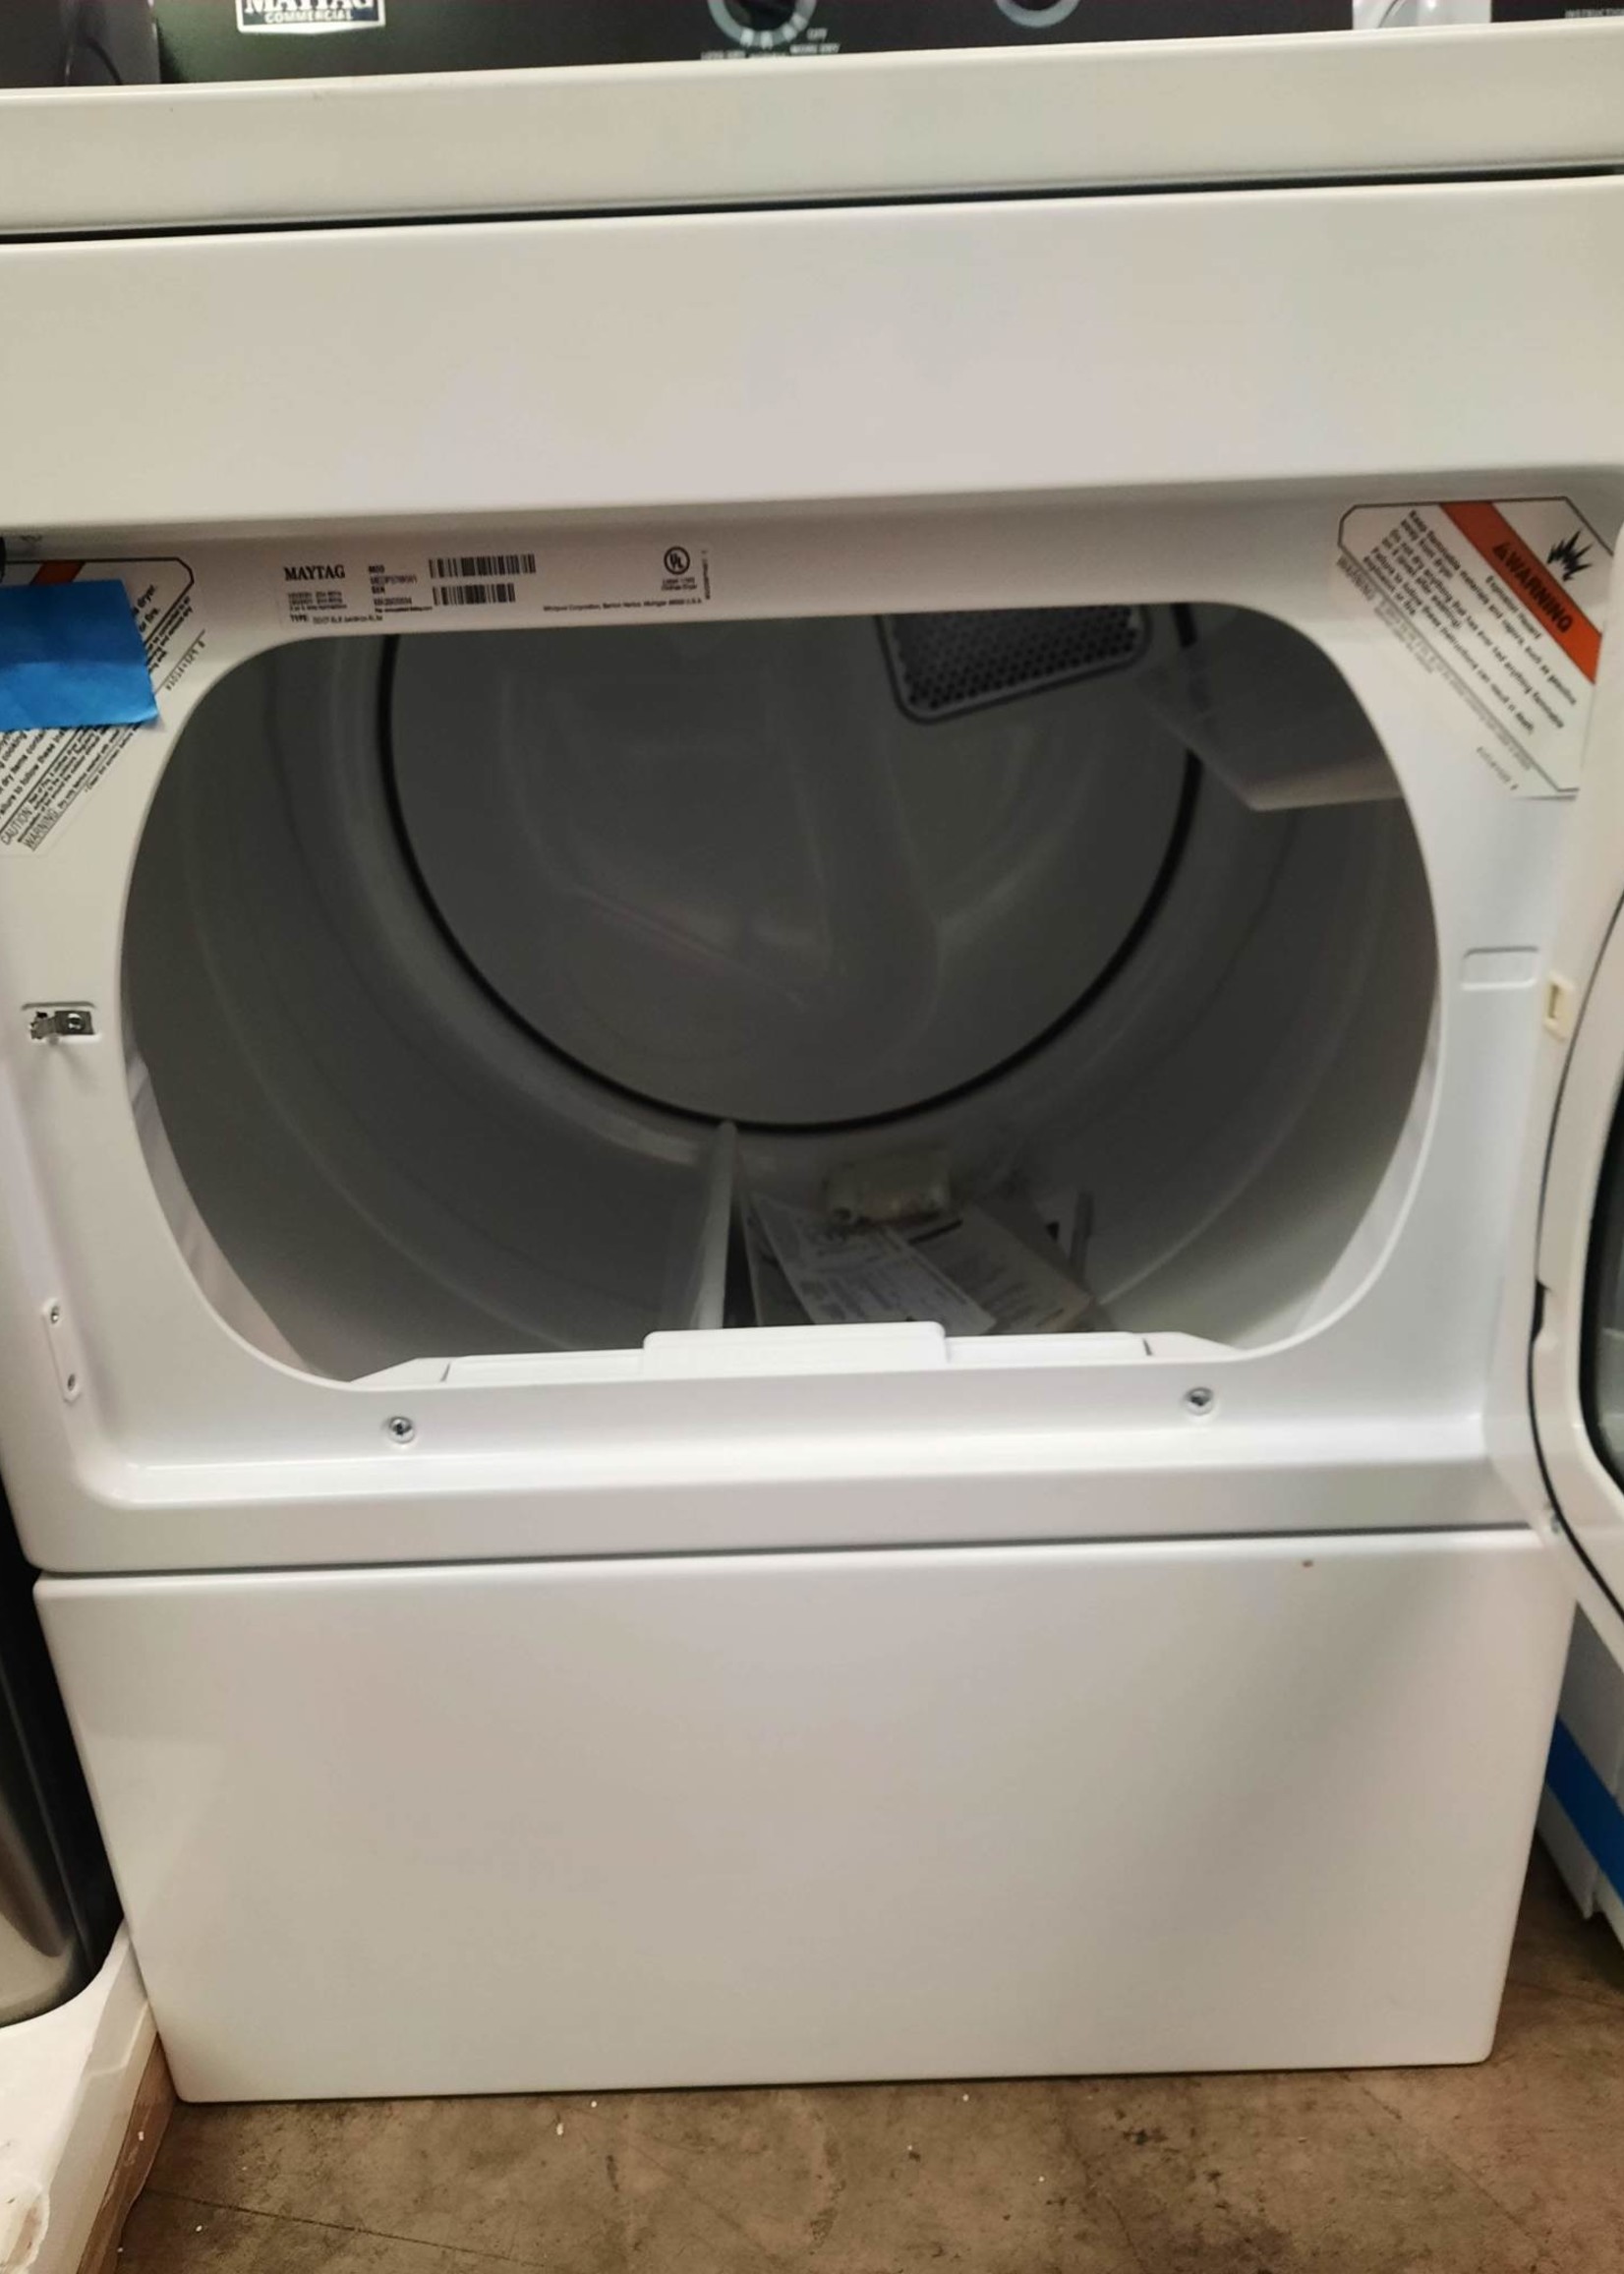 Maytag *Maytag MEDP576KW 7.4 cu. ft. Commercial-Grade Residential Dryer in White